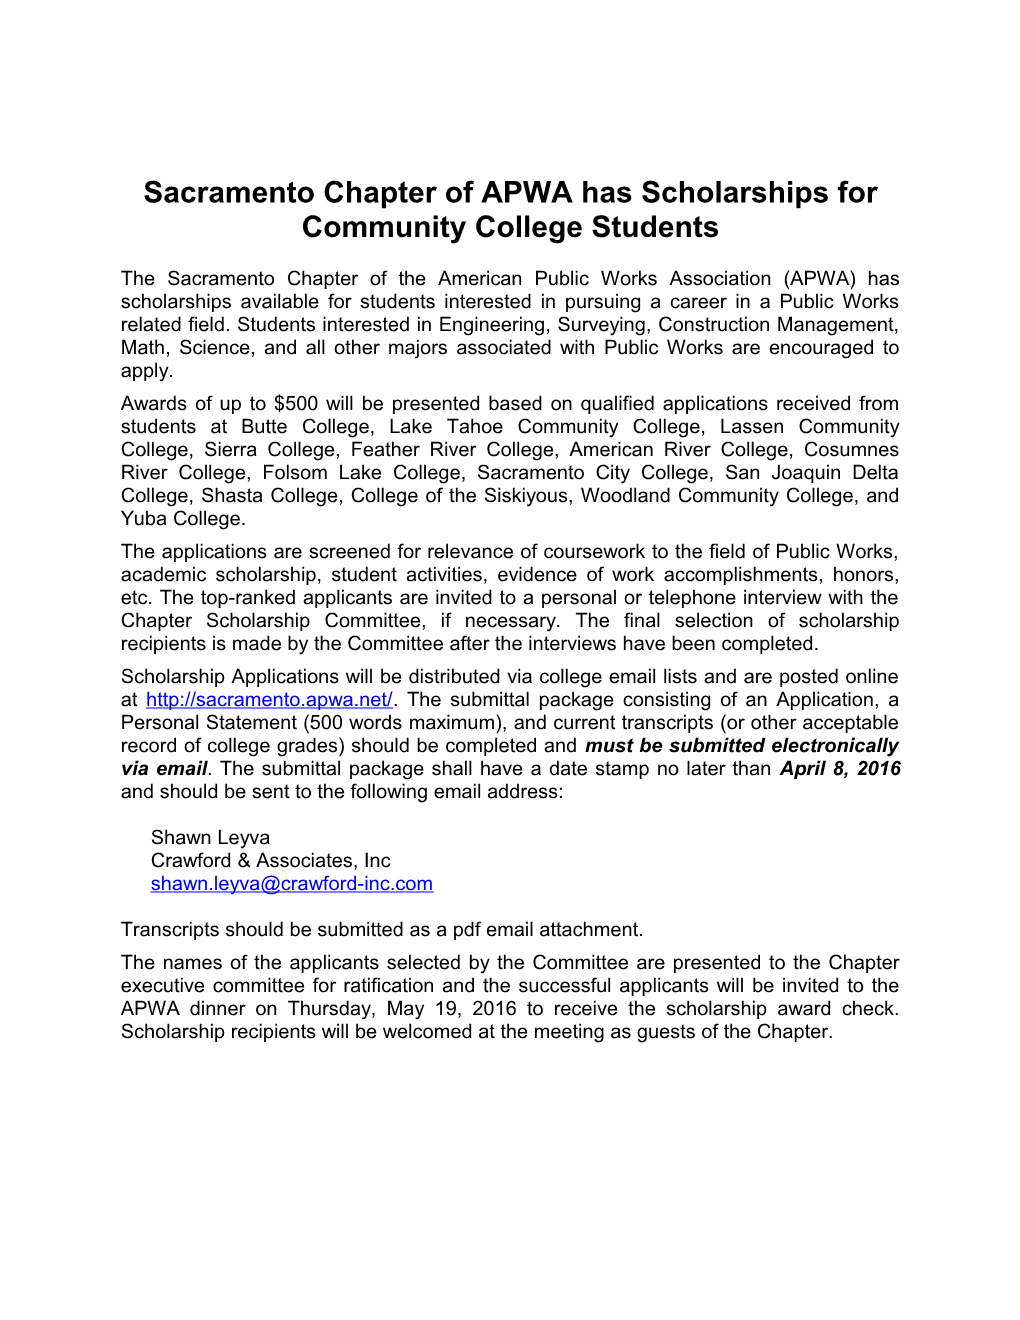 Sacramento Chapter of the American Public Works Association s1